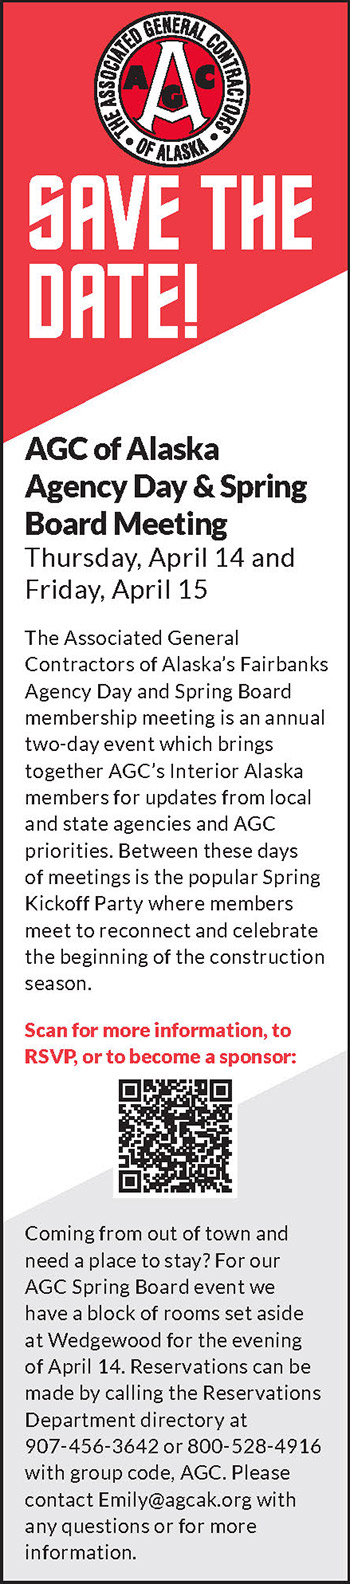 AGC Agency Day & Spring Board Meeting Advertisement